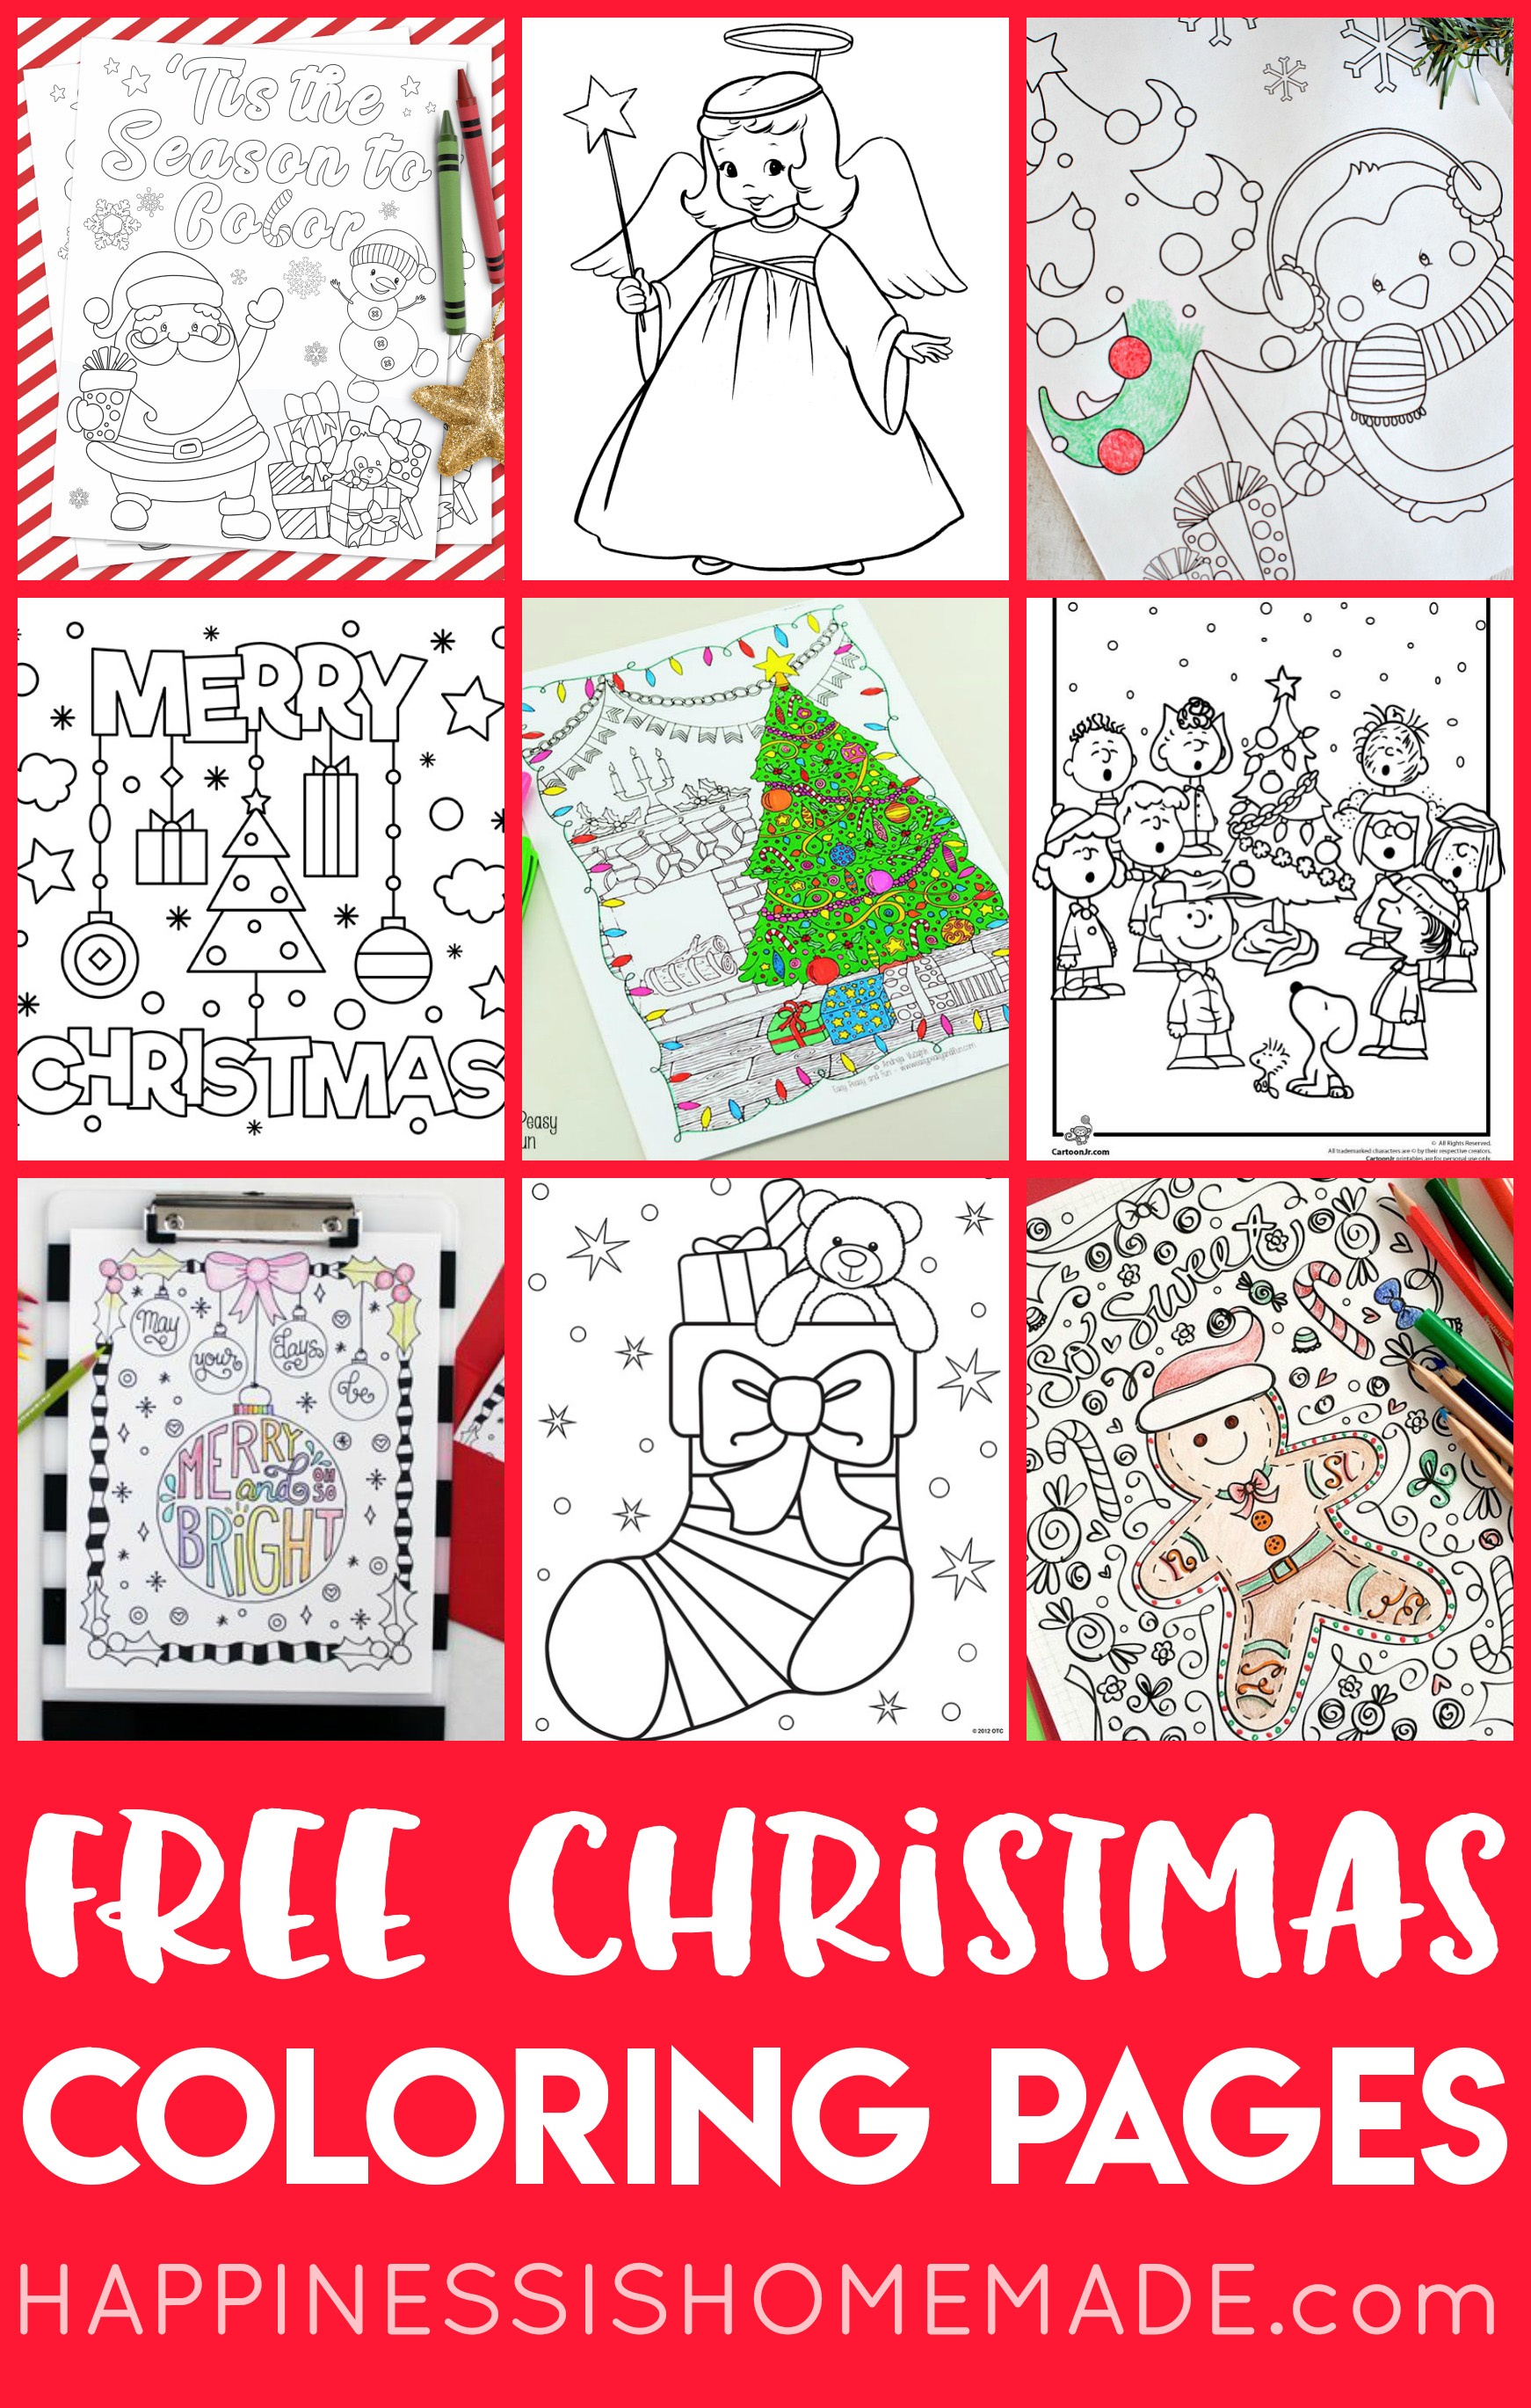 Easy Christmas Kids Crafts That Anyone Can Make! - Happiness Is Homemade - Free Printable Christmas Ornament Crafts